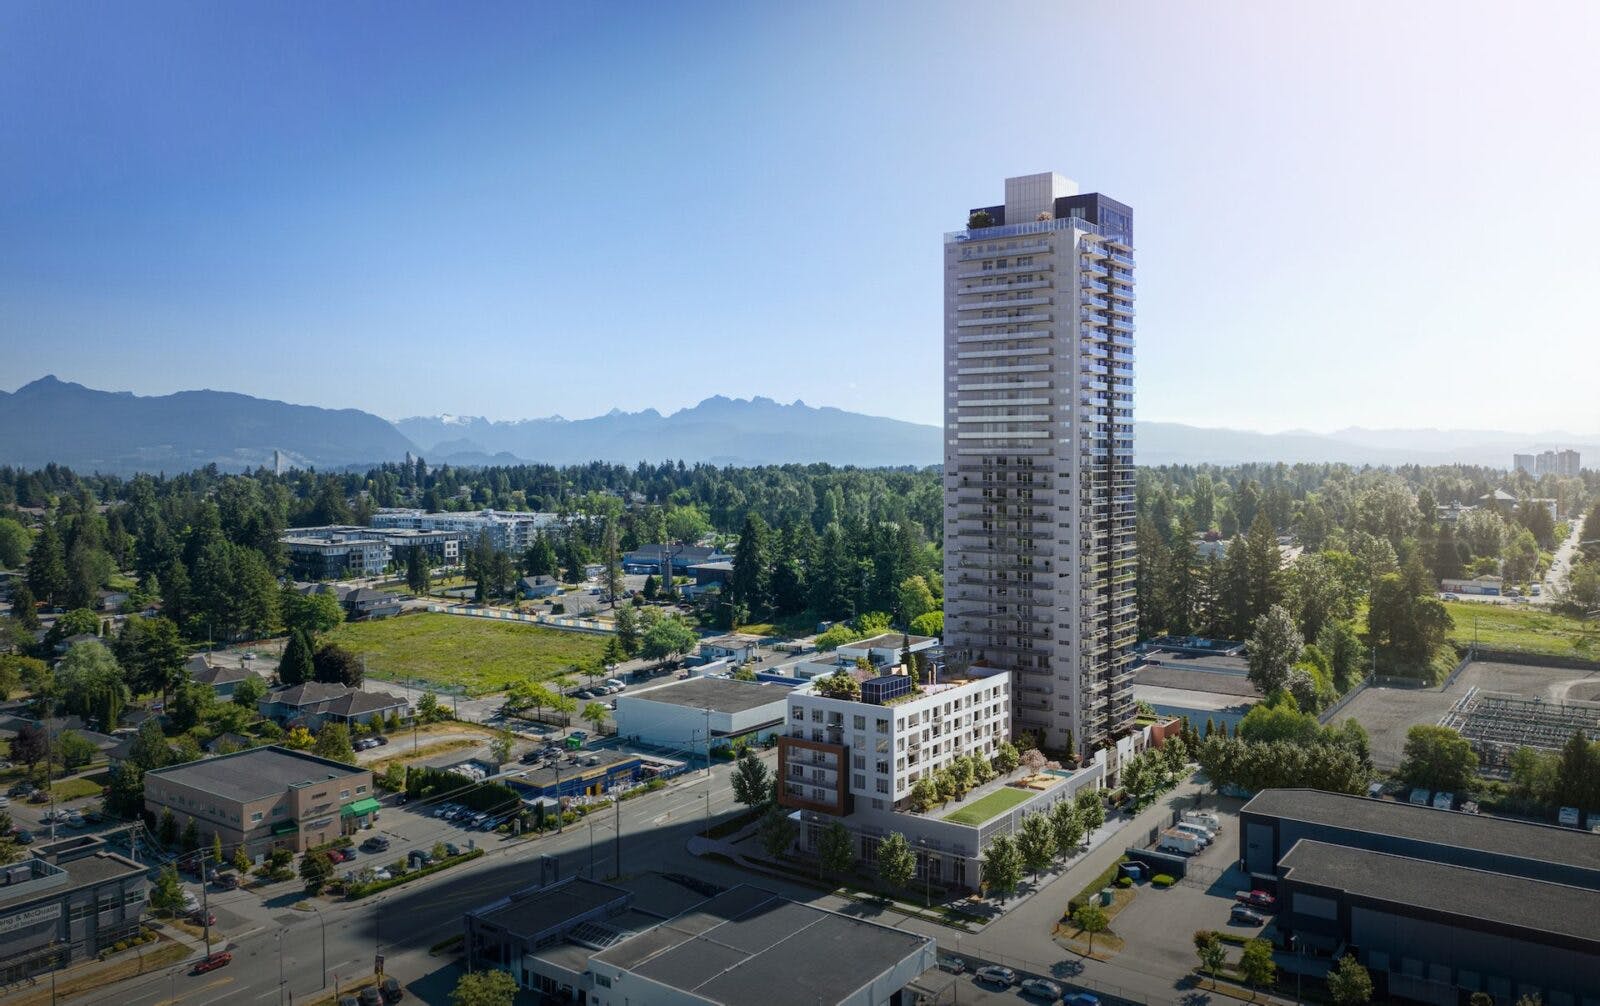 Panoramic view of Surrey City Centre from a Juno Surrey condominium, emphasizing the project's prime location.